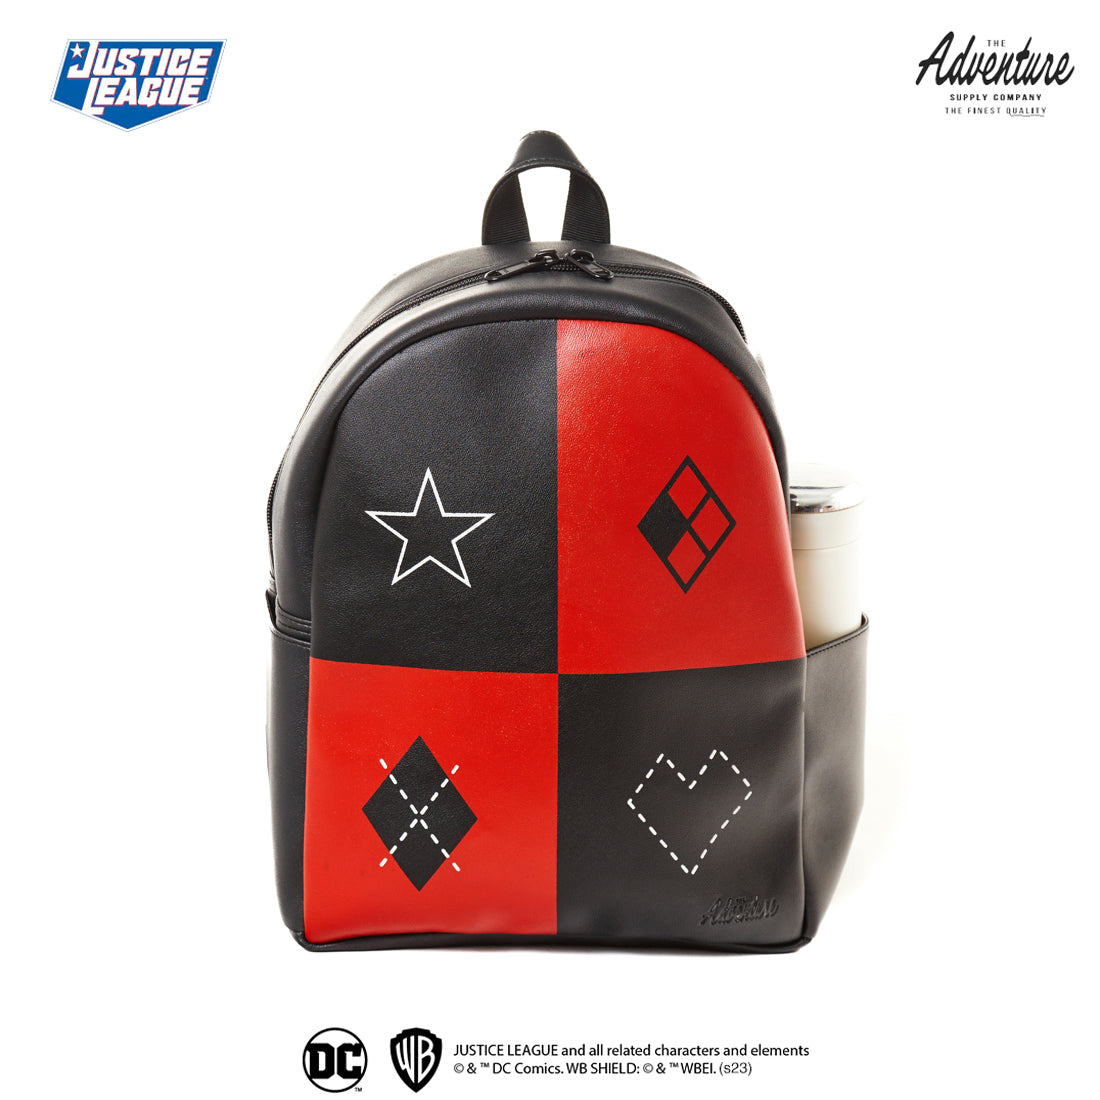 Peculiar x Adventure DC Comics Collection Harley Quinn Leather Backpack Shin